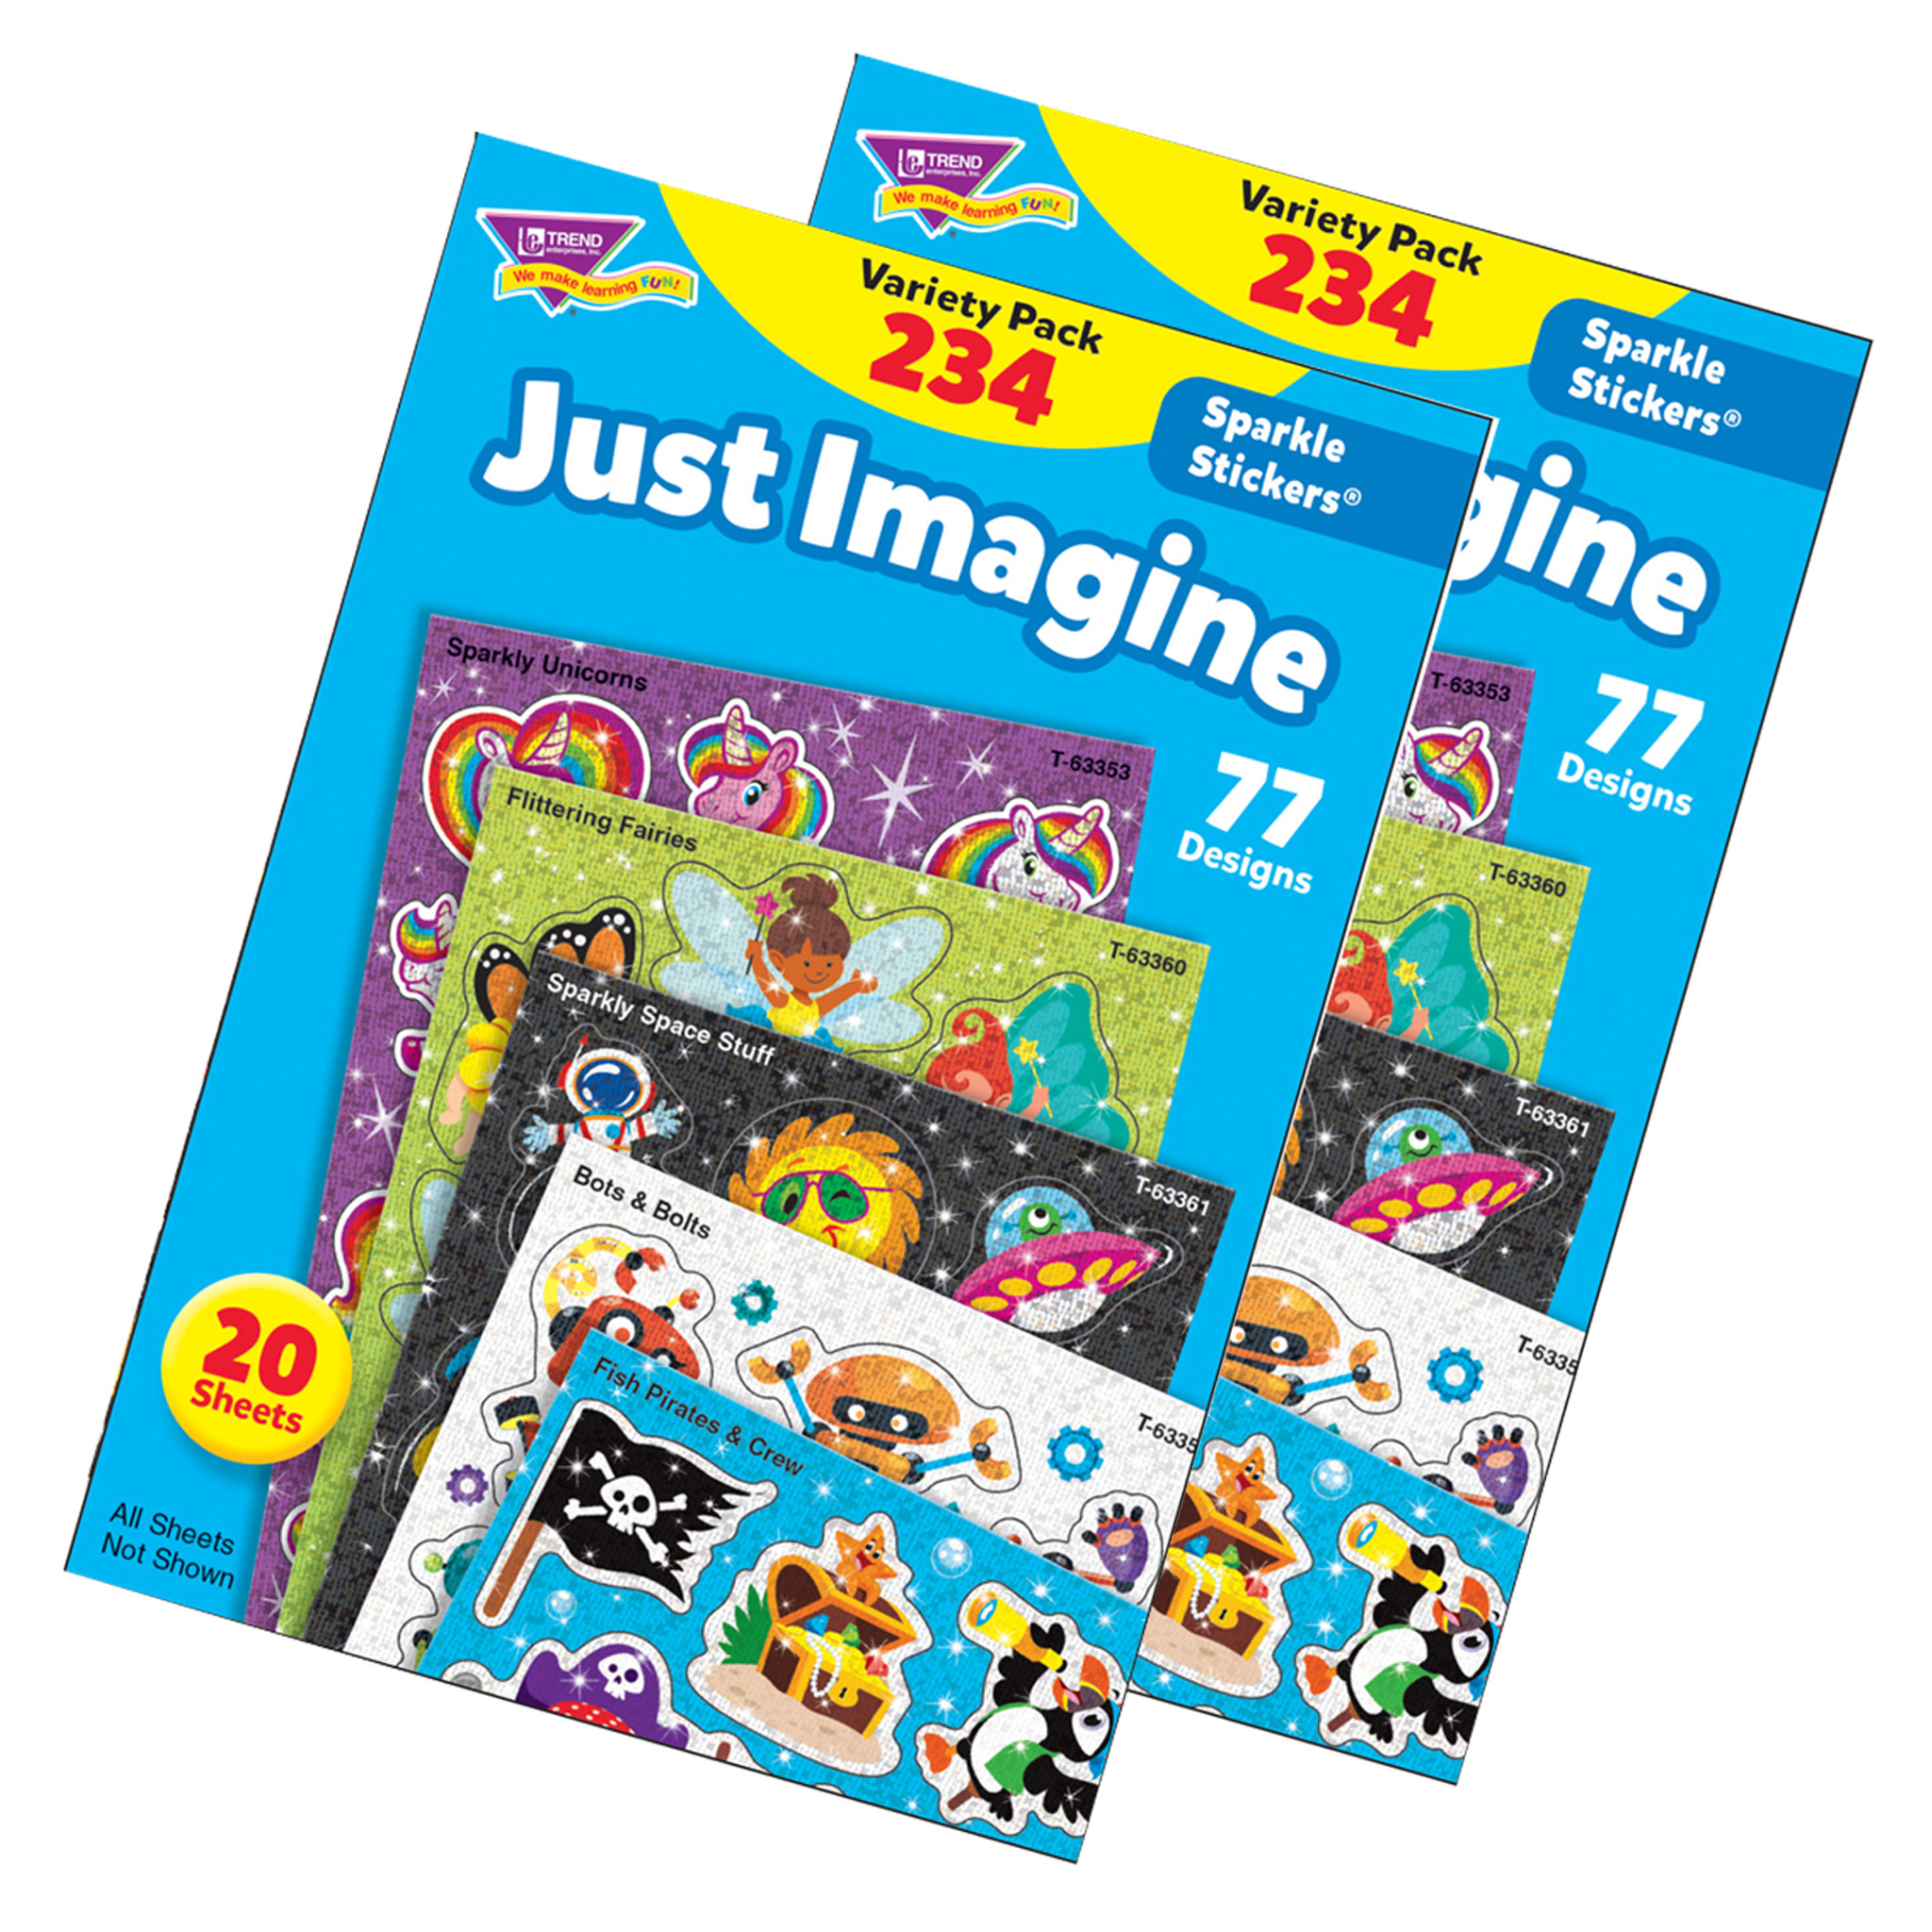 Lakeshore Just Imagine Sparkle Stickers - Variety Pack